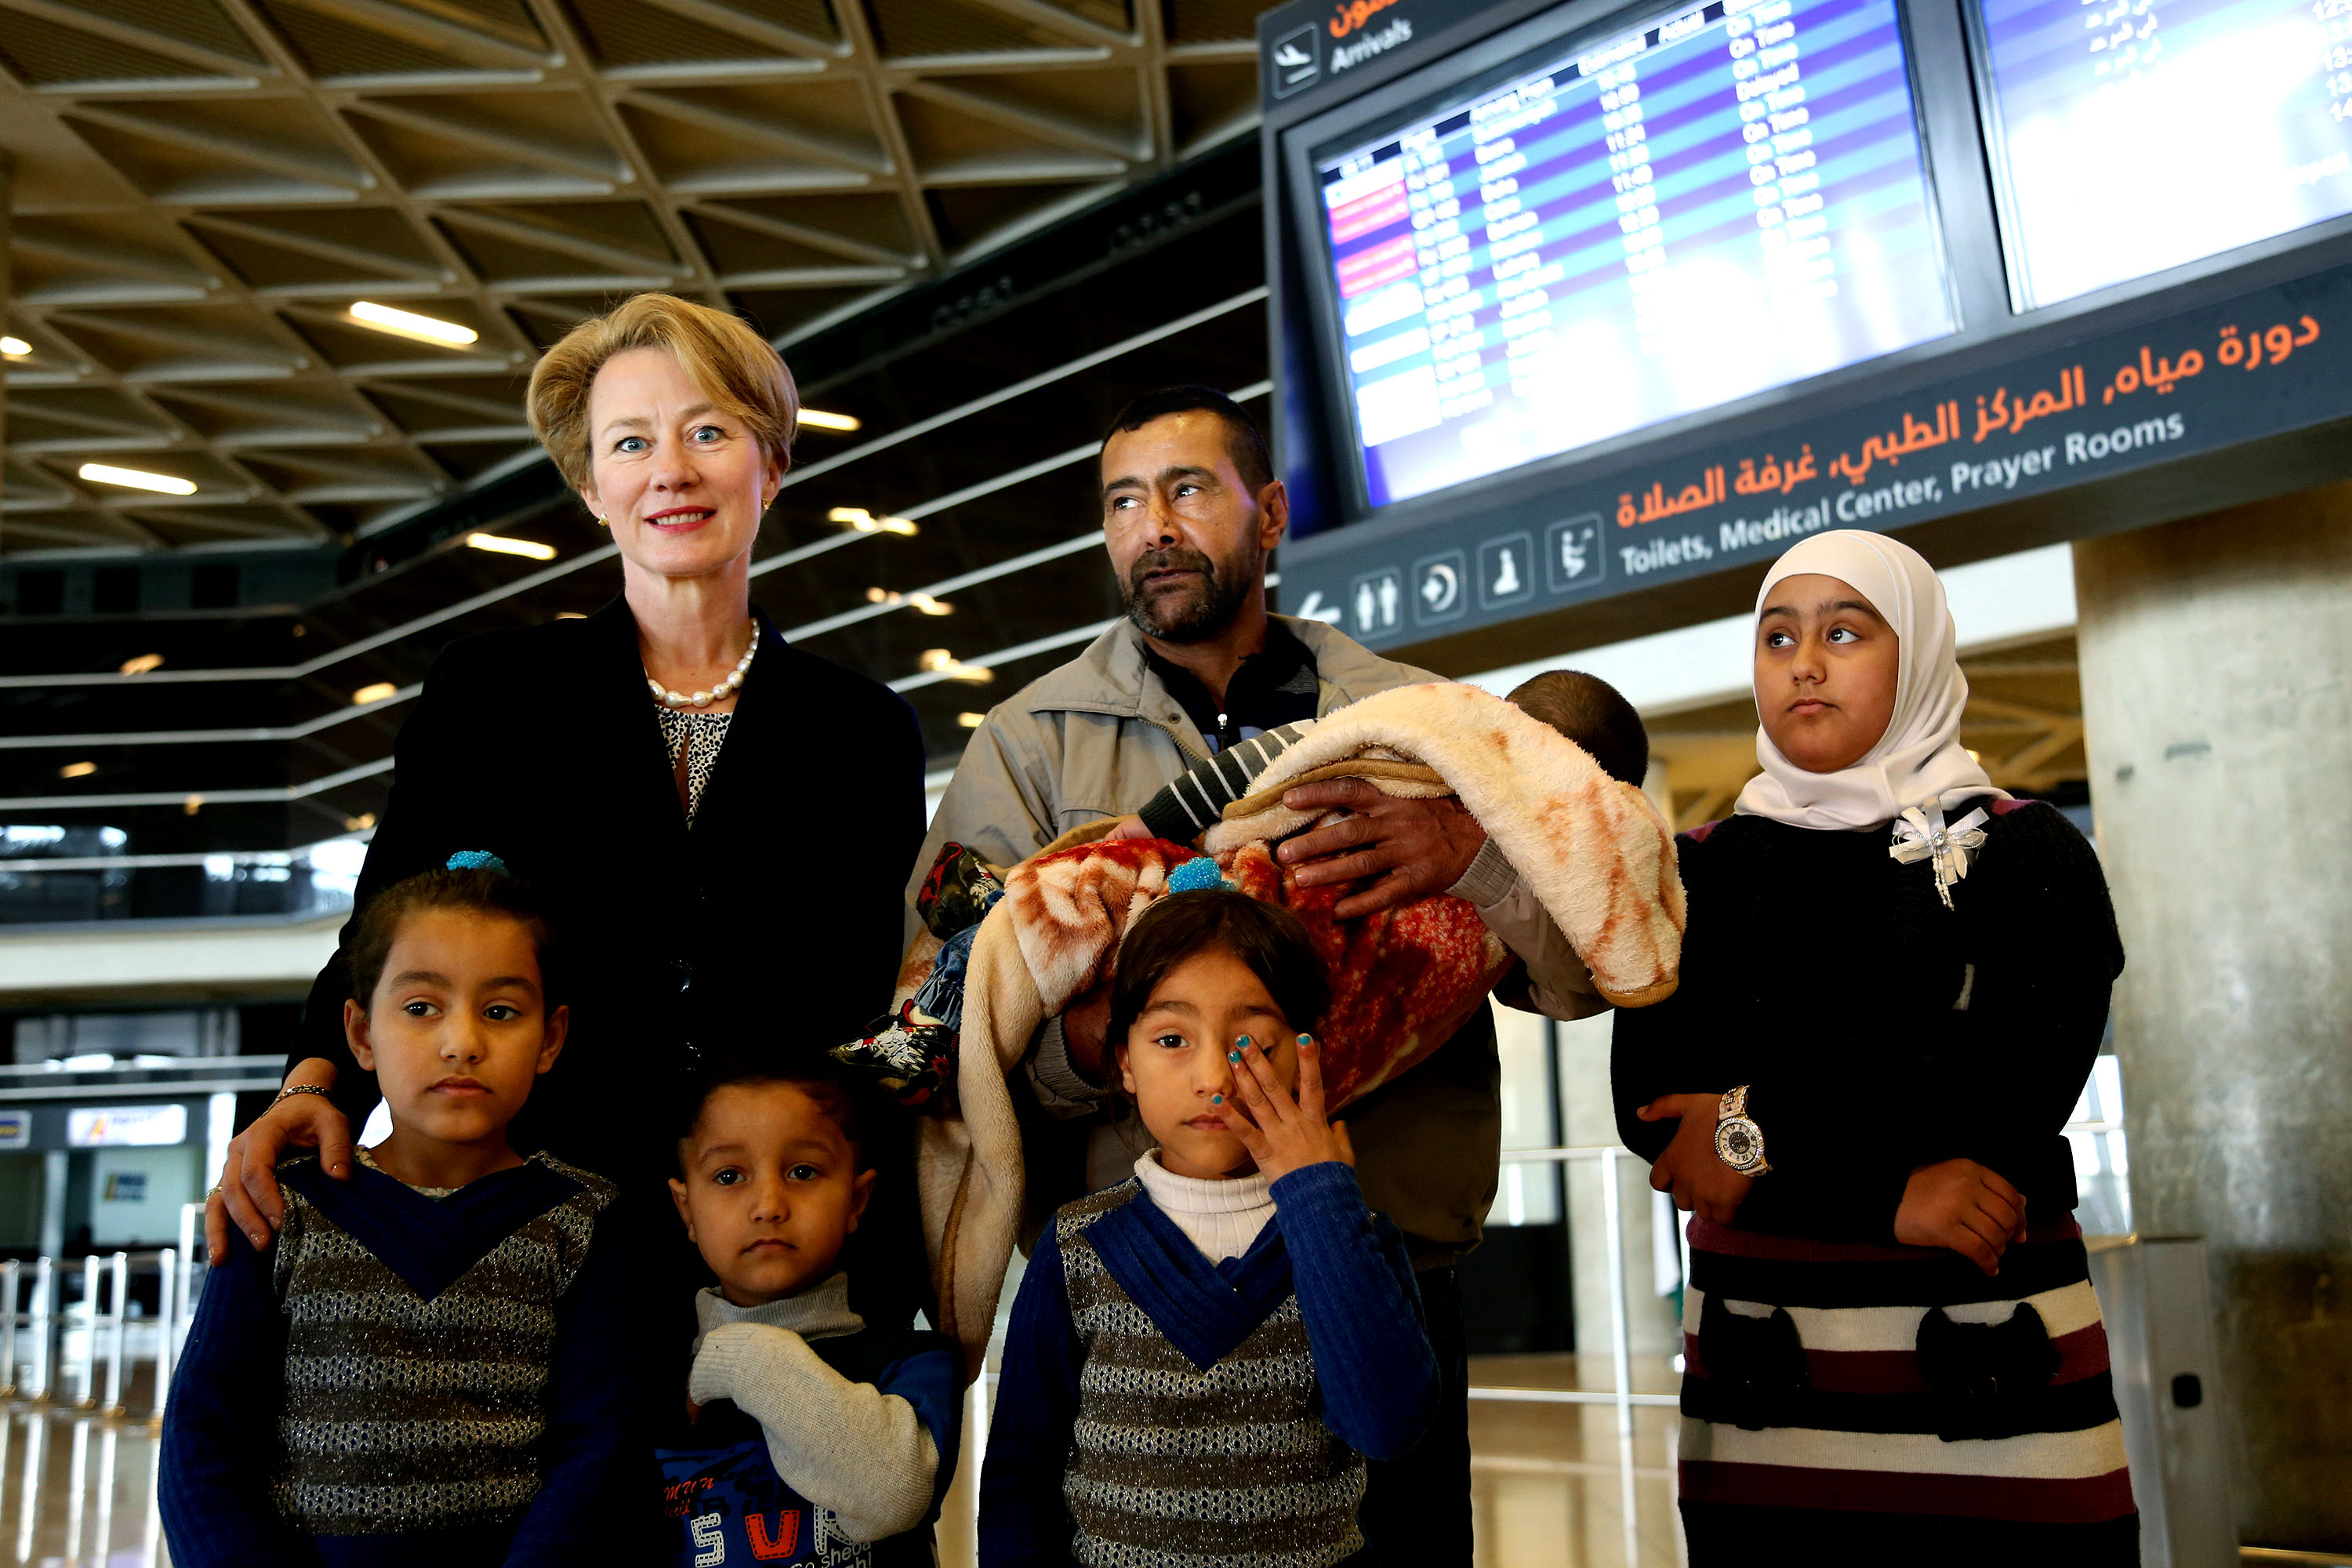 U.S. Ambassador to Jordan Alice Wells, top left, poses for a photo with Syrian refugee Ahmad al-Abboud, top center, and his family at the International Airport of Amman, Jordan, Wednesday, April 6, 2016. The first Syrian family to be resettled to the U.S. under its speeded-up "surge operation" departed to the United States Wednesday from the Jordanian capital, Amman. Al-Abboud, who is being resettled with his wife and five children, said that although he is thankful to Jordan — where he has lived for three years after fleeing Syria's civil war — he is hopeful of finding a better life in the U.S. (AP Photo/Raad Adayleh)